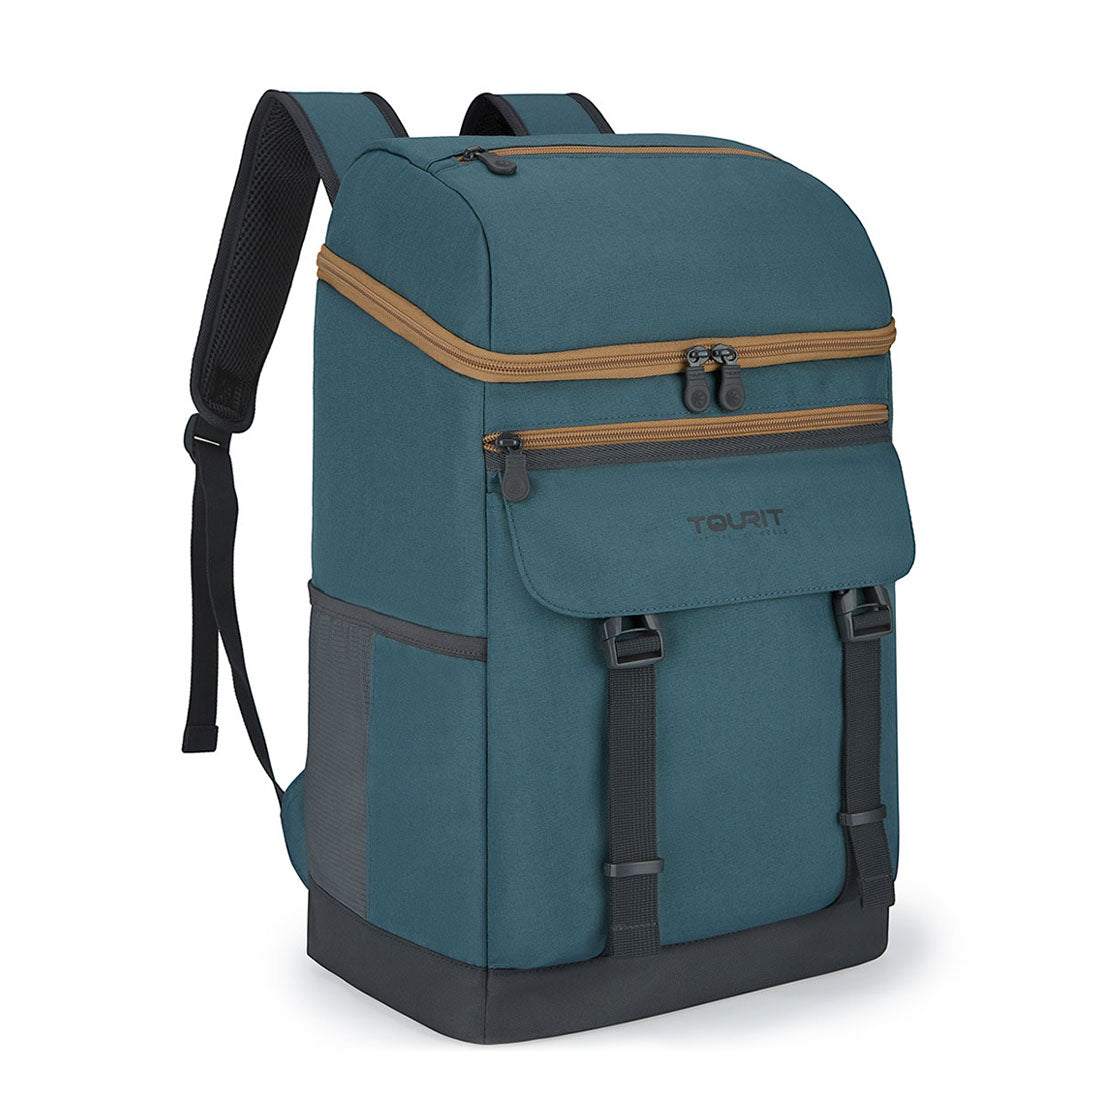 TERNS INSULATED BACKPACK-Cadet Blue